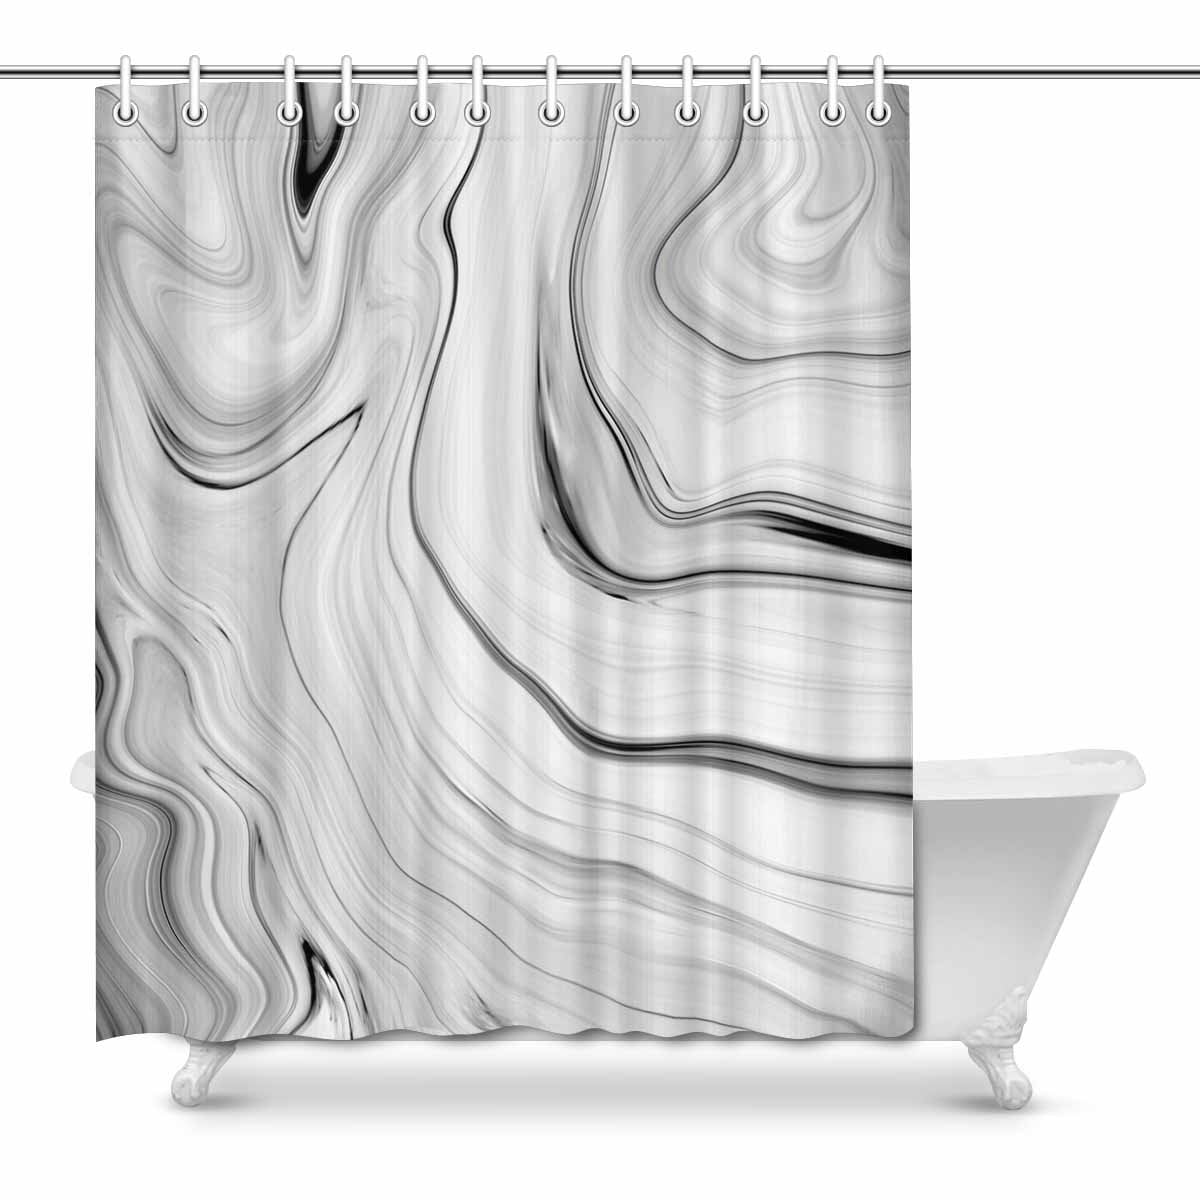 on Black Gold Marble Shower Curtain with 12 Hooks Fabric Shower Curtain Set 69 W by 70 L Lips Made of 100 Dollars and Gold Marble Shower Curtain for Bathroom